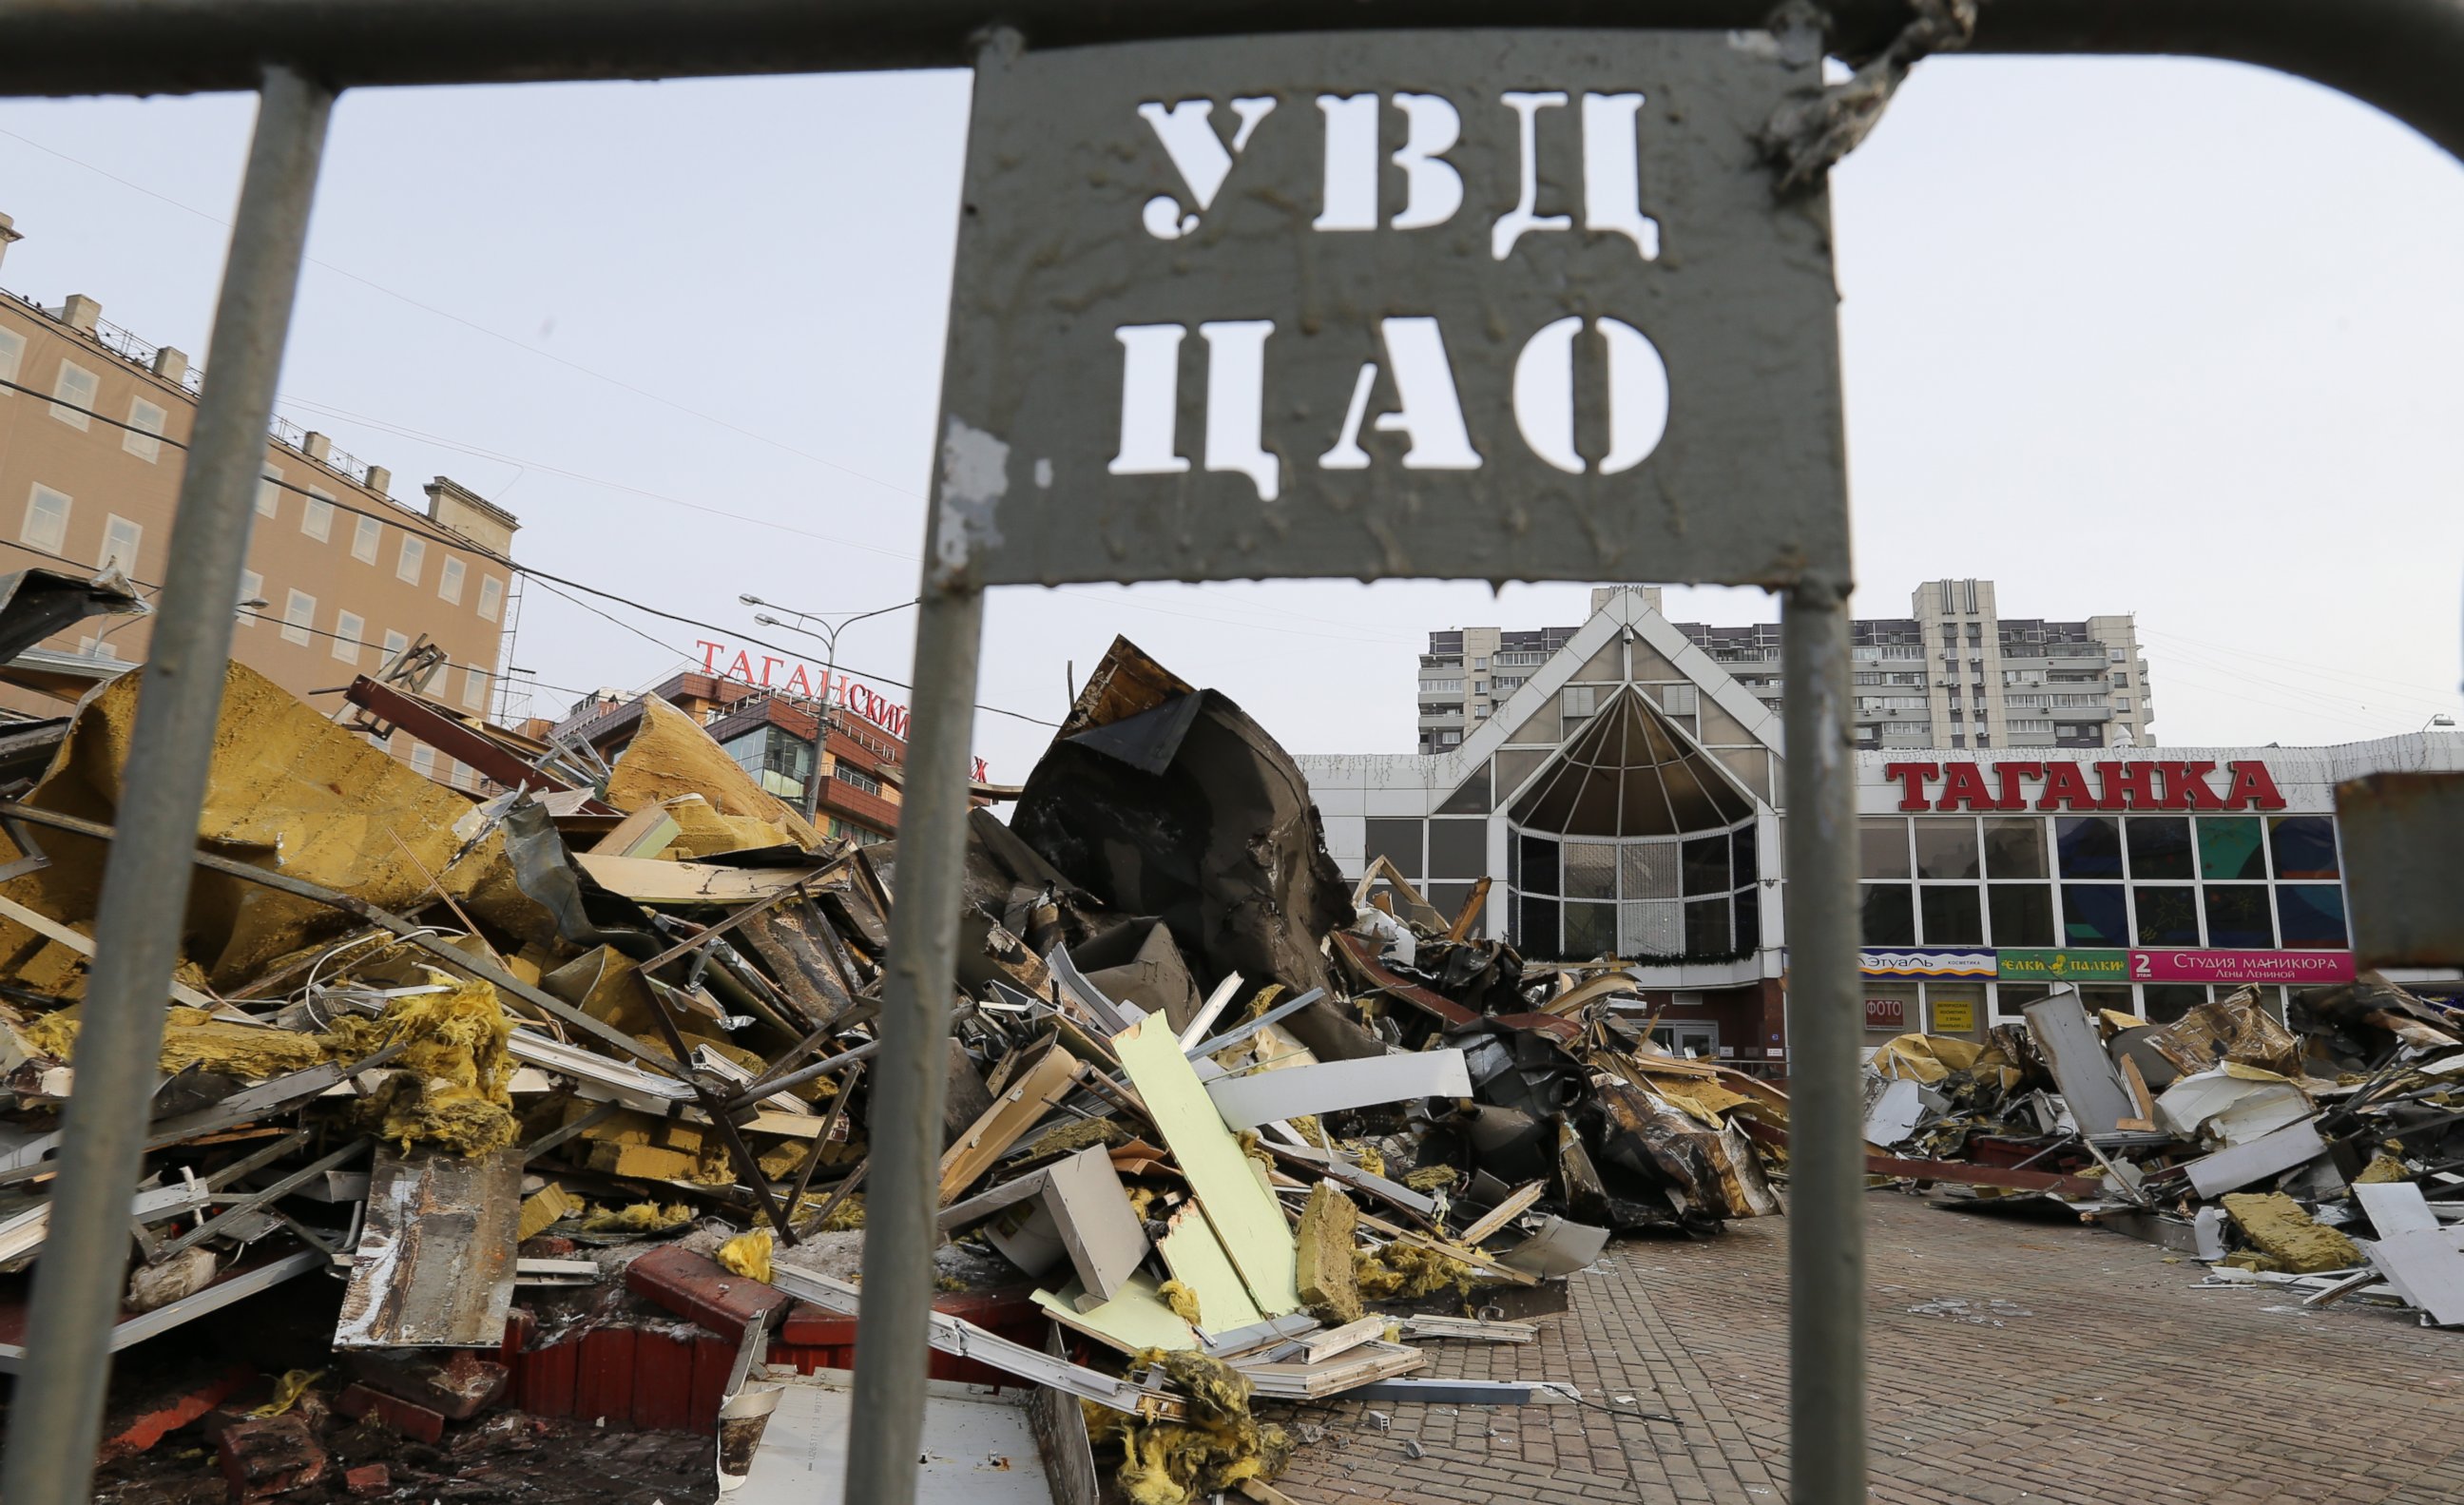 The site of demolished kiosks and shops near Marksistskaya metro station in Moscow, Feb. 10, 2016. The kiosks were demolished overnight by the Moscow government using bulldozers. 